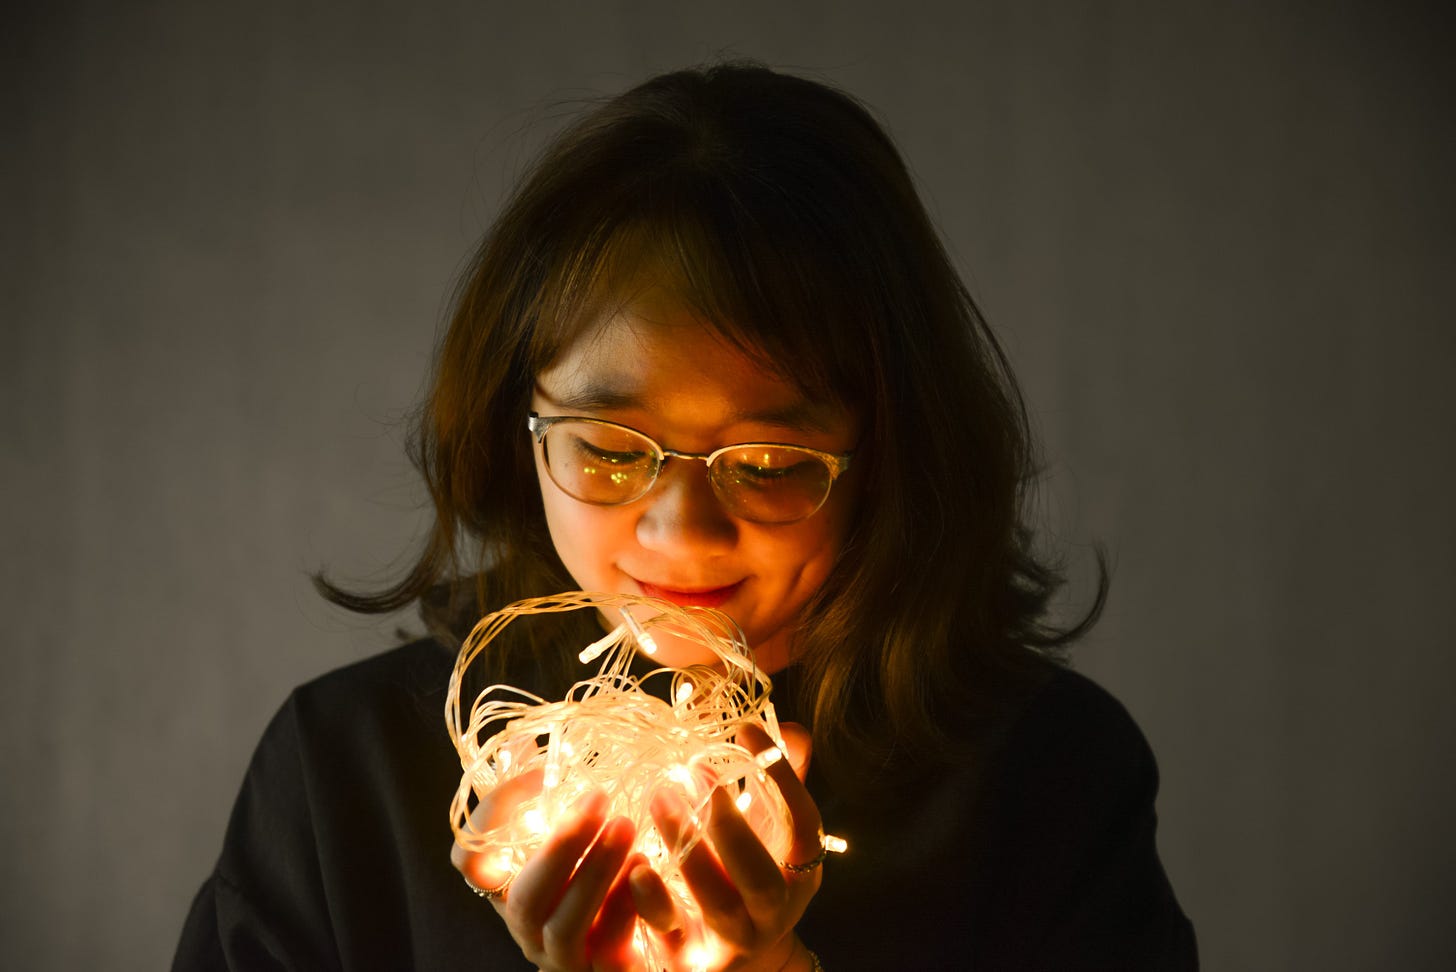 a young girl, wearing glasses, cups in her hands fairy lights. She has a soft smile on her face.